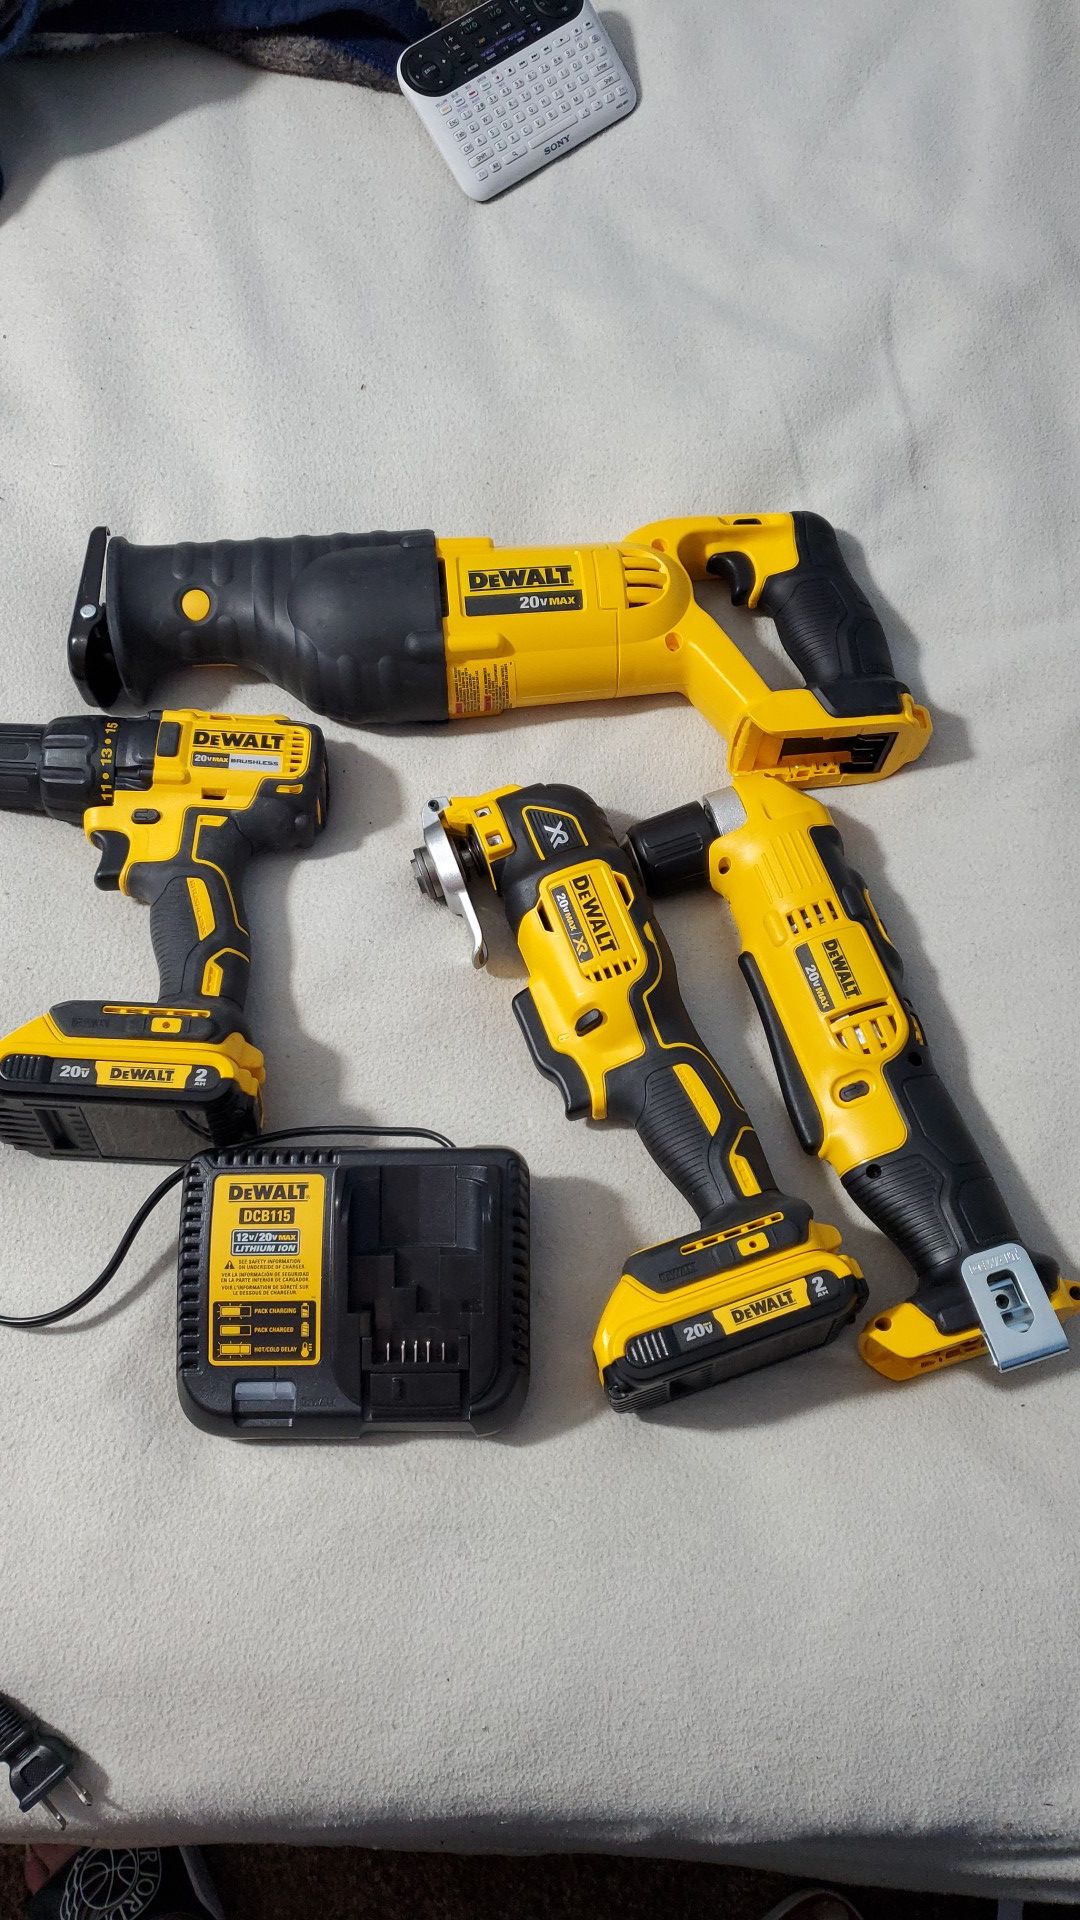 Dewalt 4 Tool Set with Batteries and Charger. Drill Driver, right angle drill, oscillating tool, and sawsall. All new unused